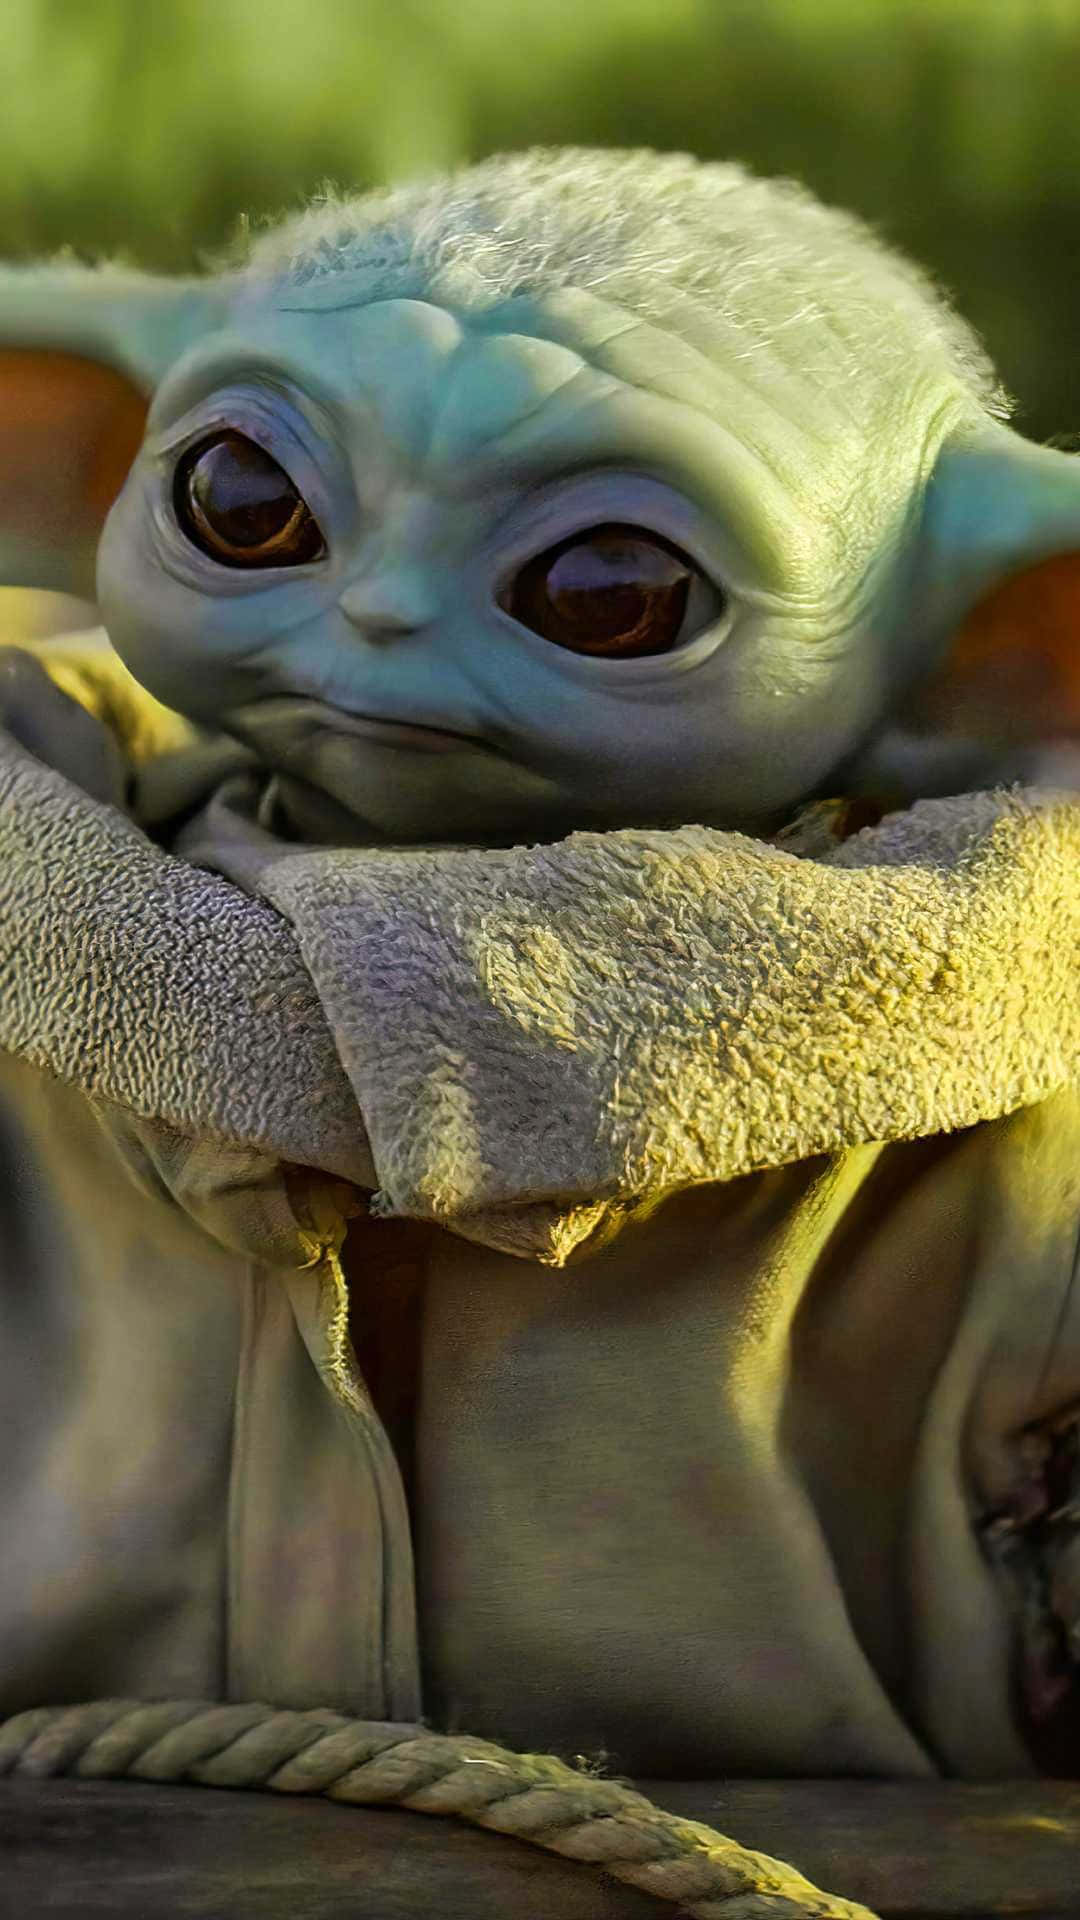 The Baby Yoda Is Sitting On A Wooden Table Wallpaper